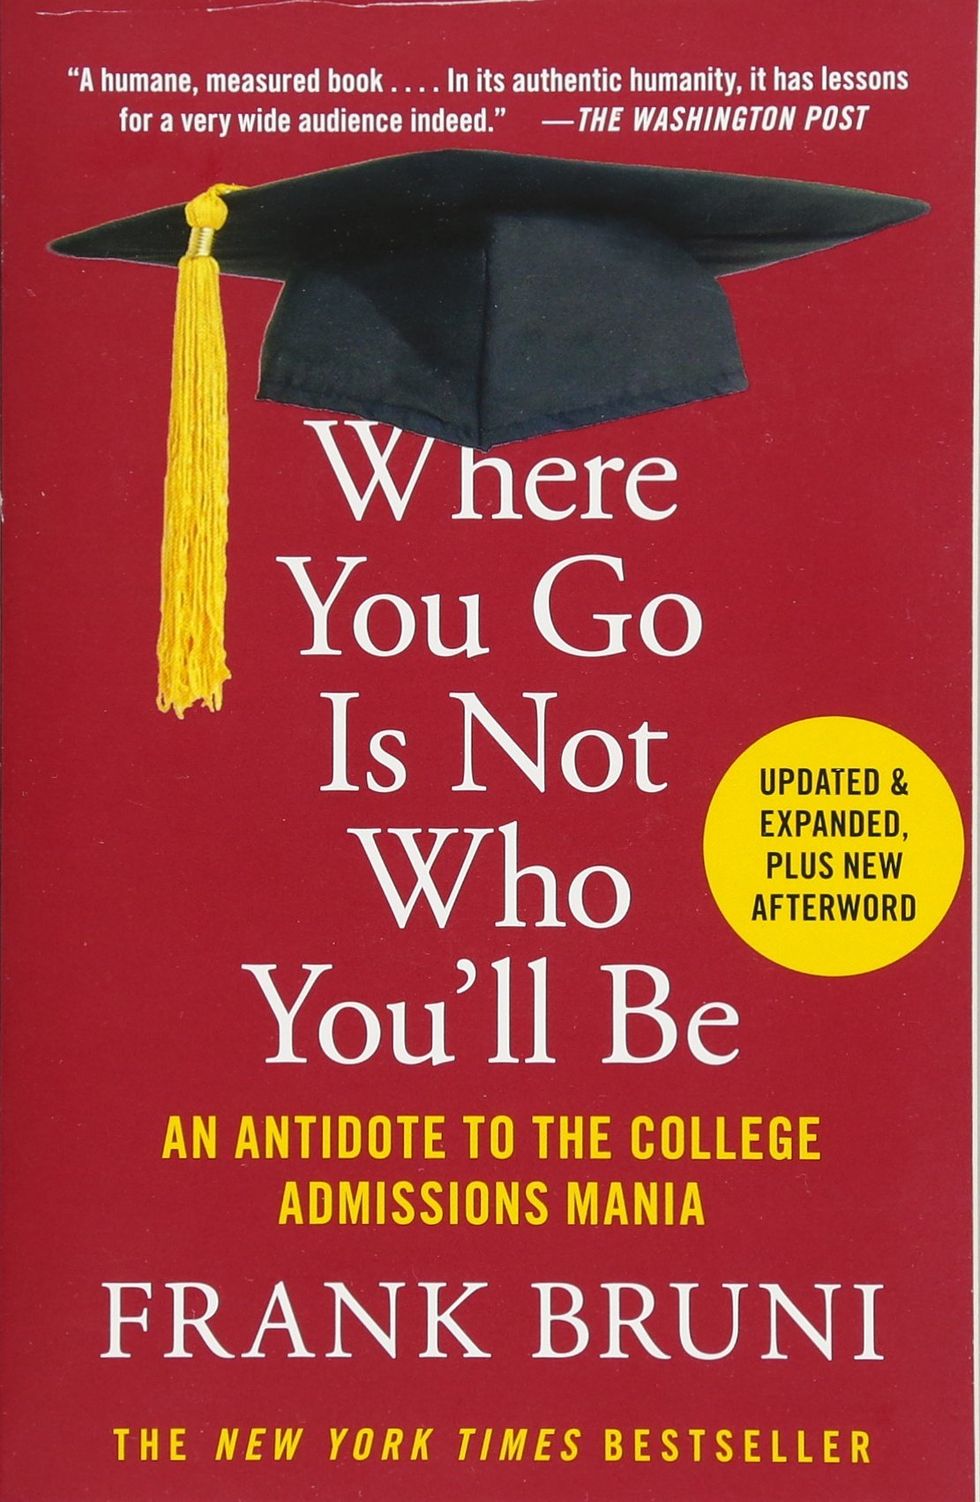 You Can't Be Where You Go: The Antidote to College Mania